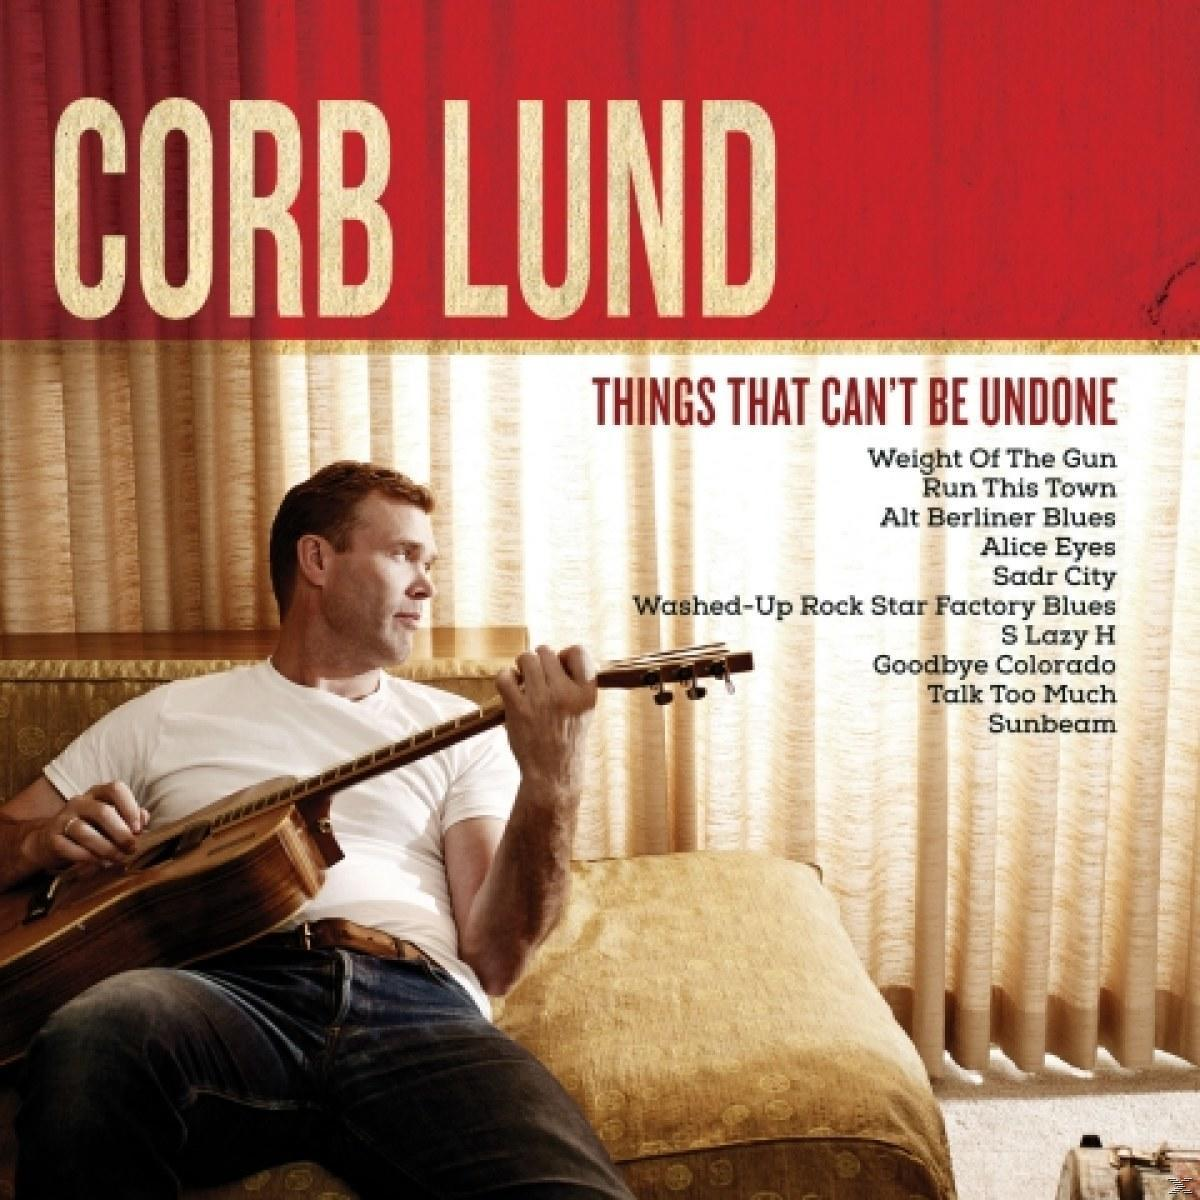 Things Lund - Can\'t That Be (Vinyl) Corb Undone -